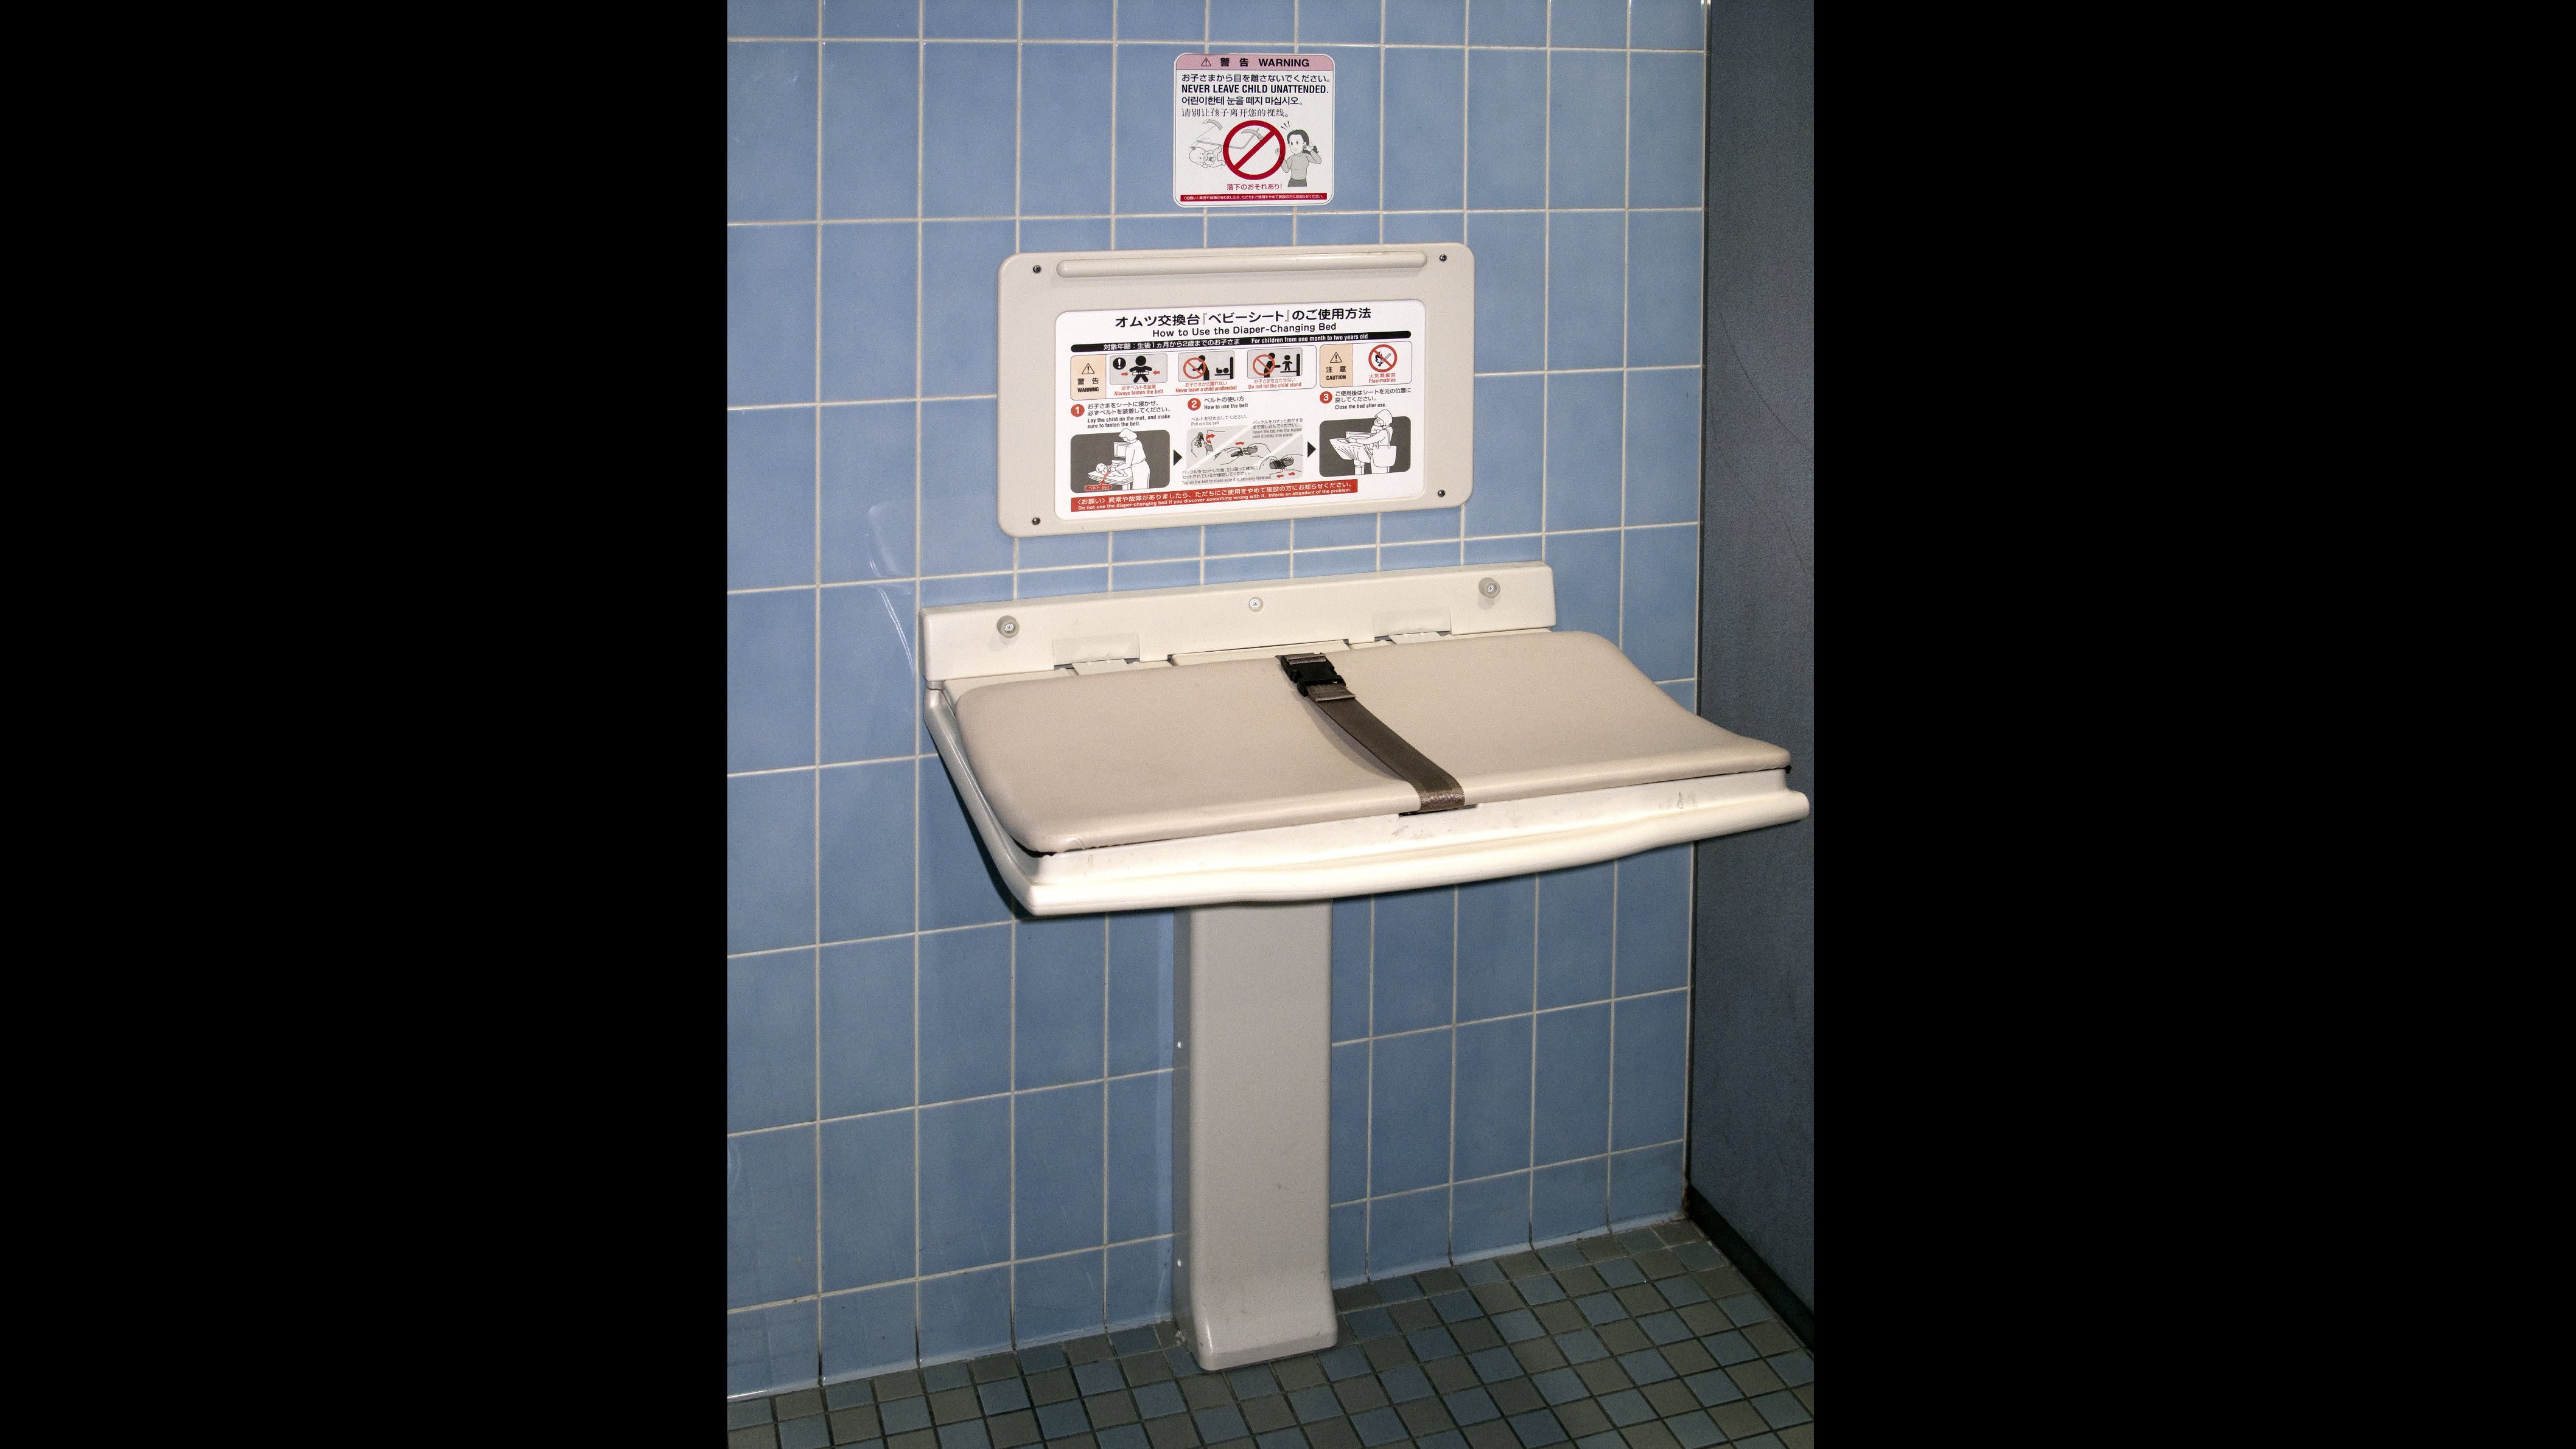 Baby changing station in a mens room, ive never seen one before :  r/MadeMeSmile